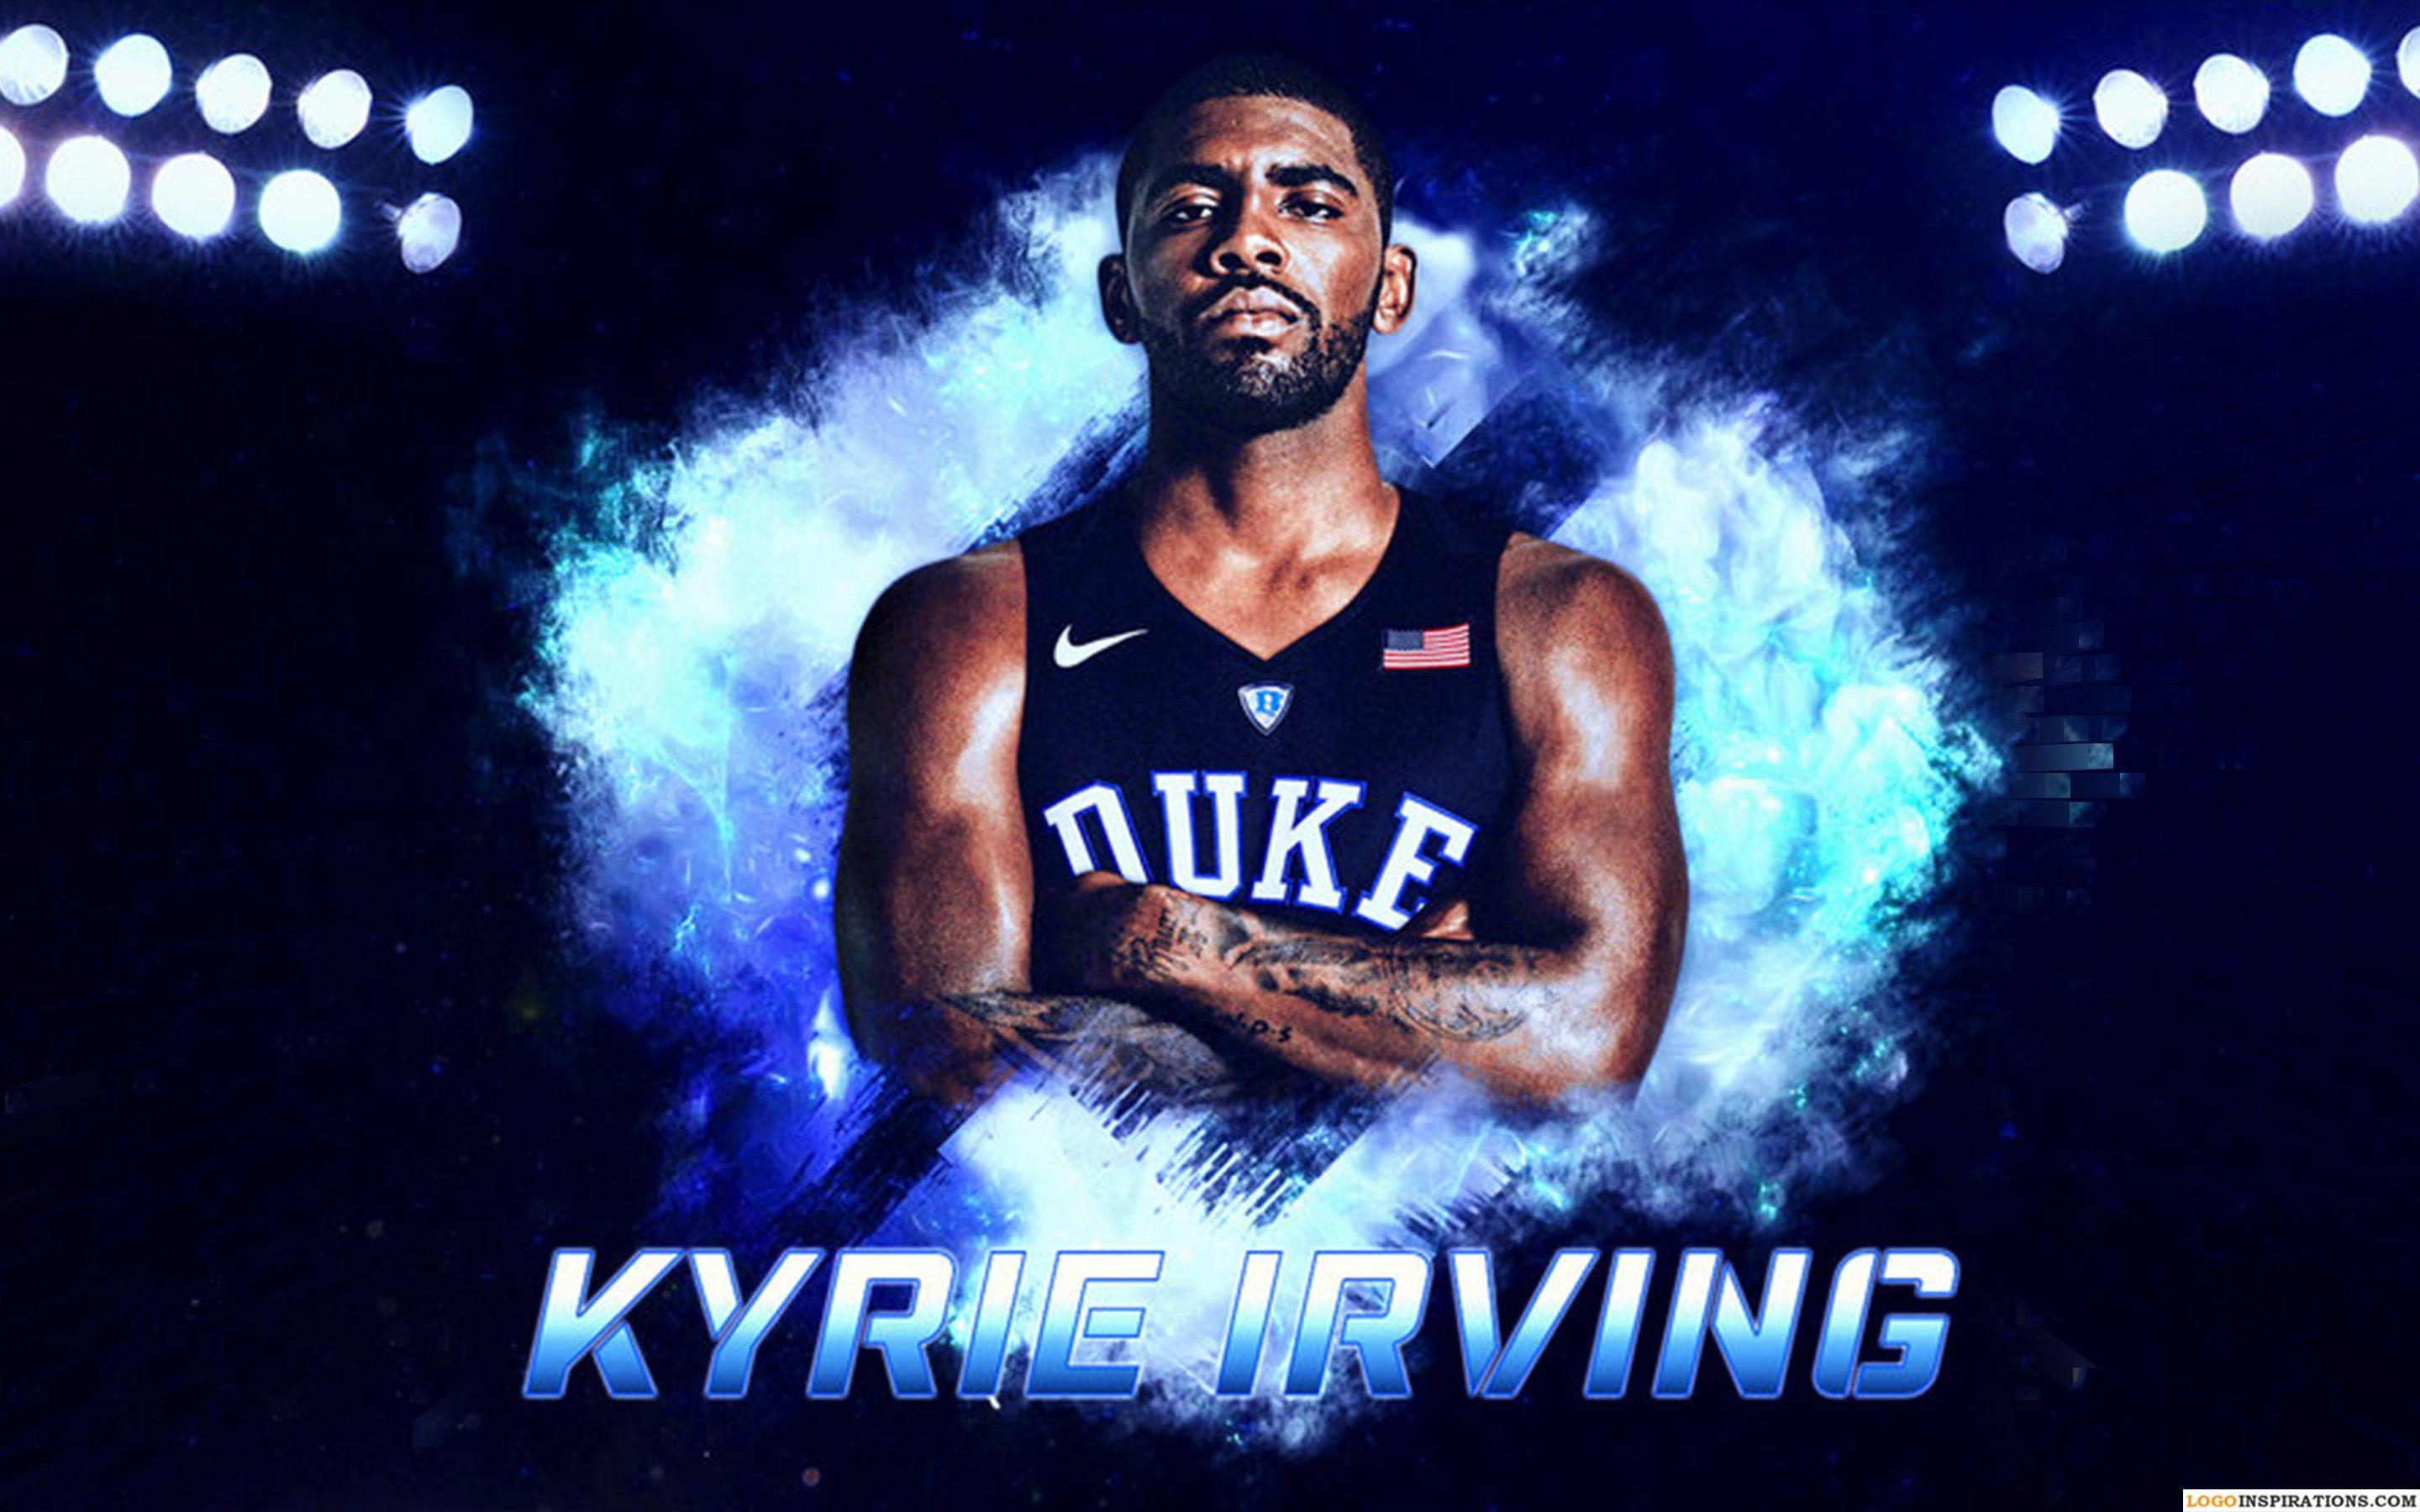 Free download 1080x1067px Kyrie Irving Boston Wallpapers [1080x1067] for  your Desktop, Mobile & Tablet | Explore 18+ Irving Boston Wallpapers |  Boston City Wallpaper, Boston Wallpapers, Kyrie Irving Cavs Wallpaper